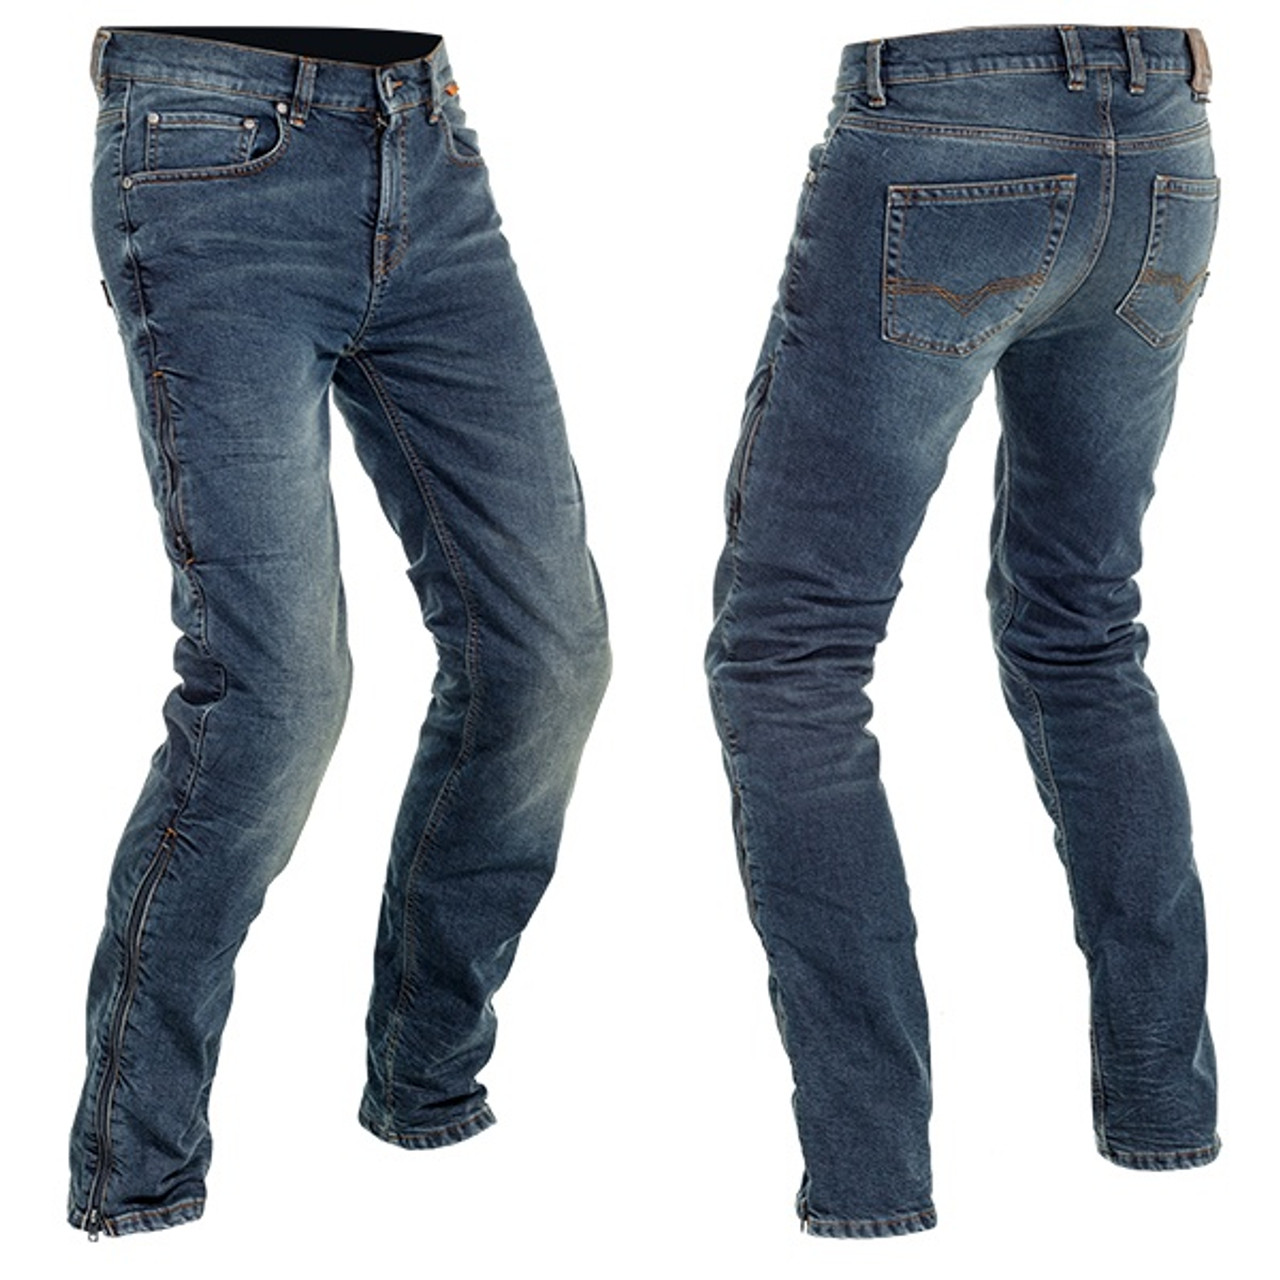 Richa Adventure Reinforced Jeans - Washed Blue